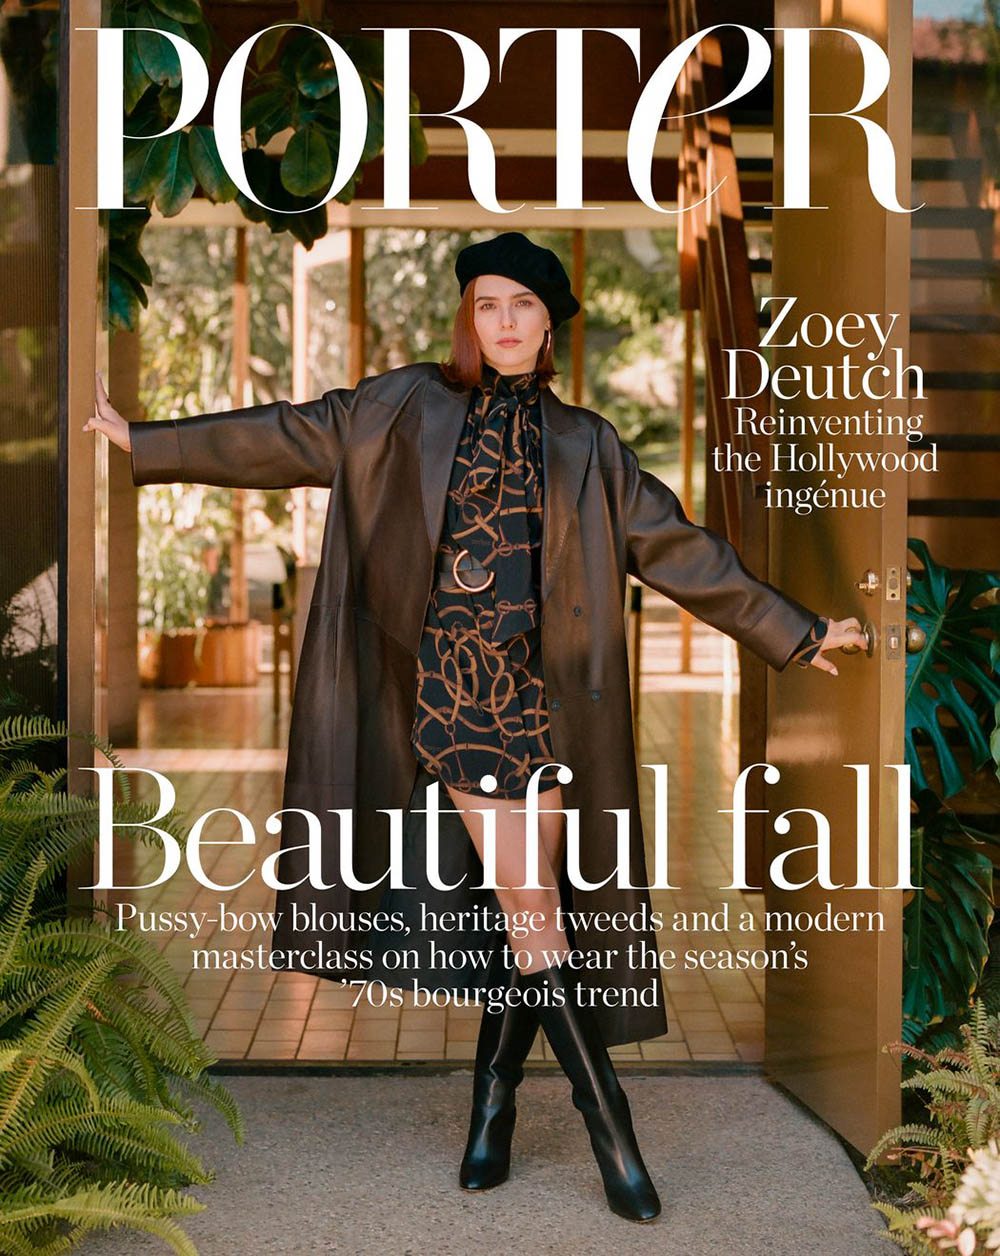 Zoey Deutch covers Porter Magazine October 4th, 2019 by Katie McCurdy